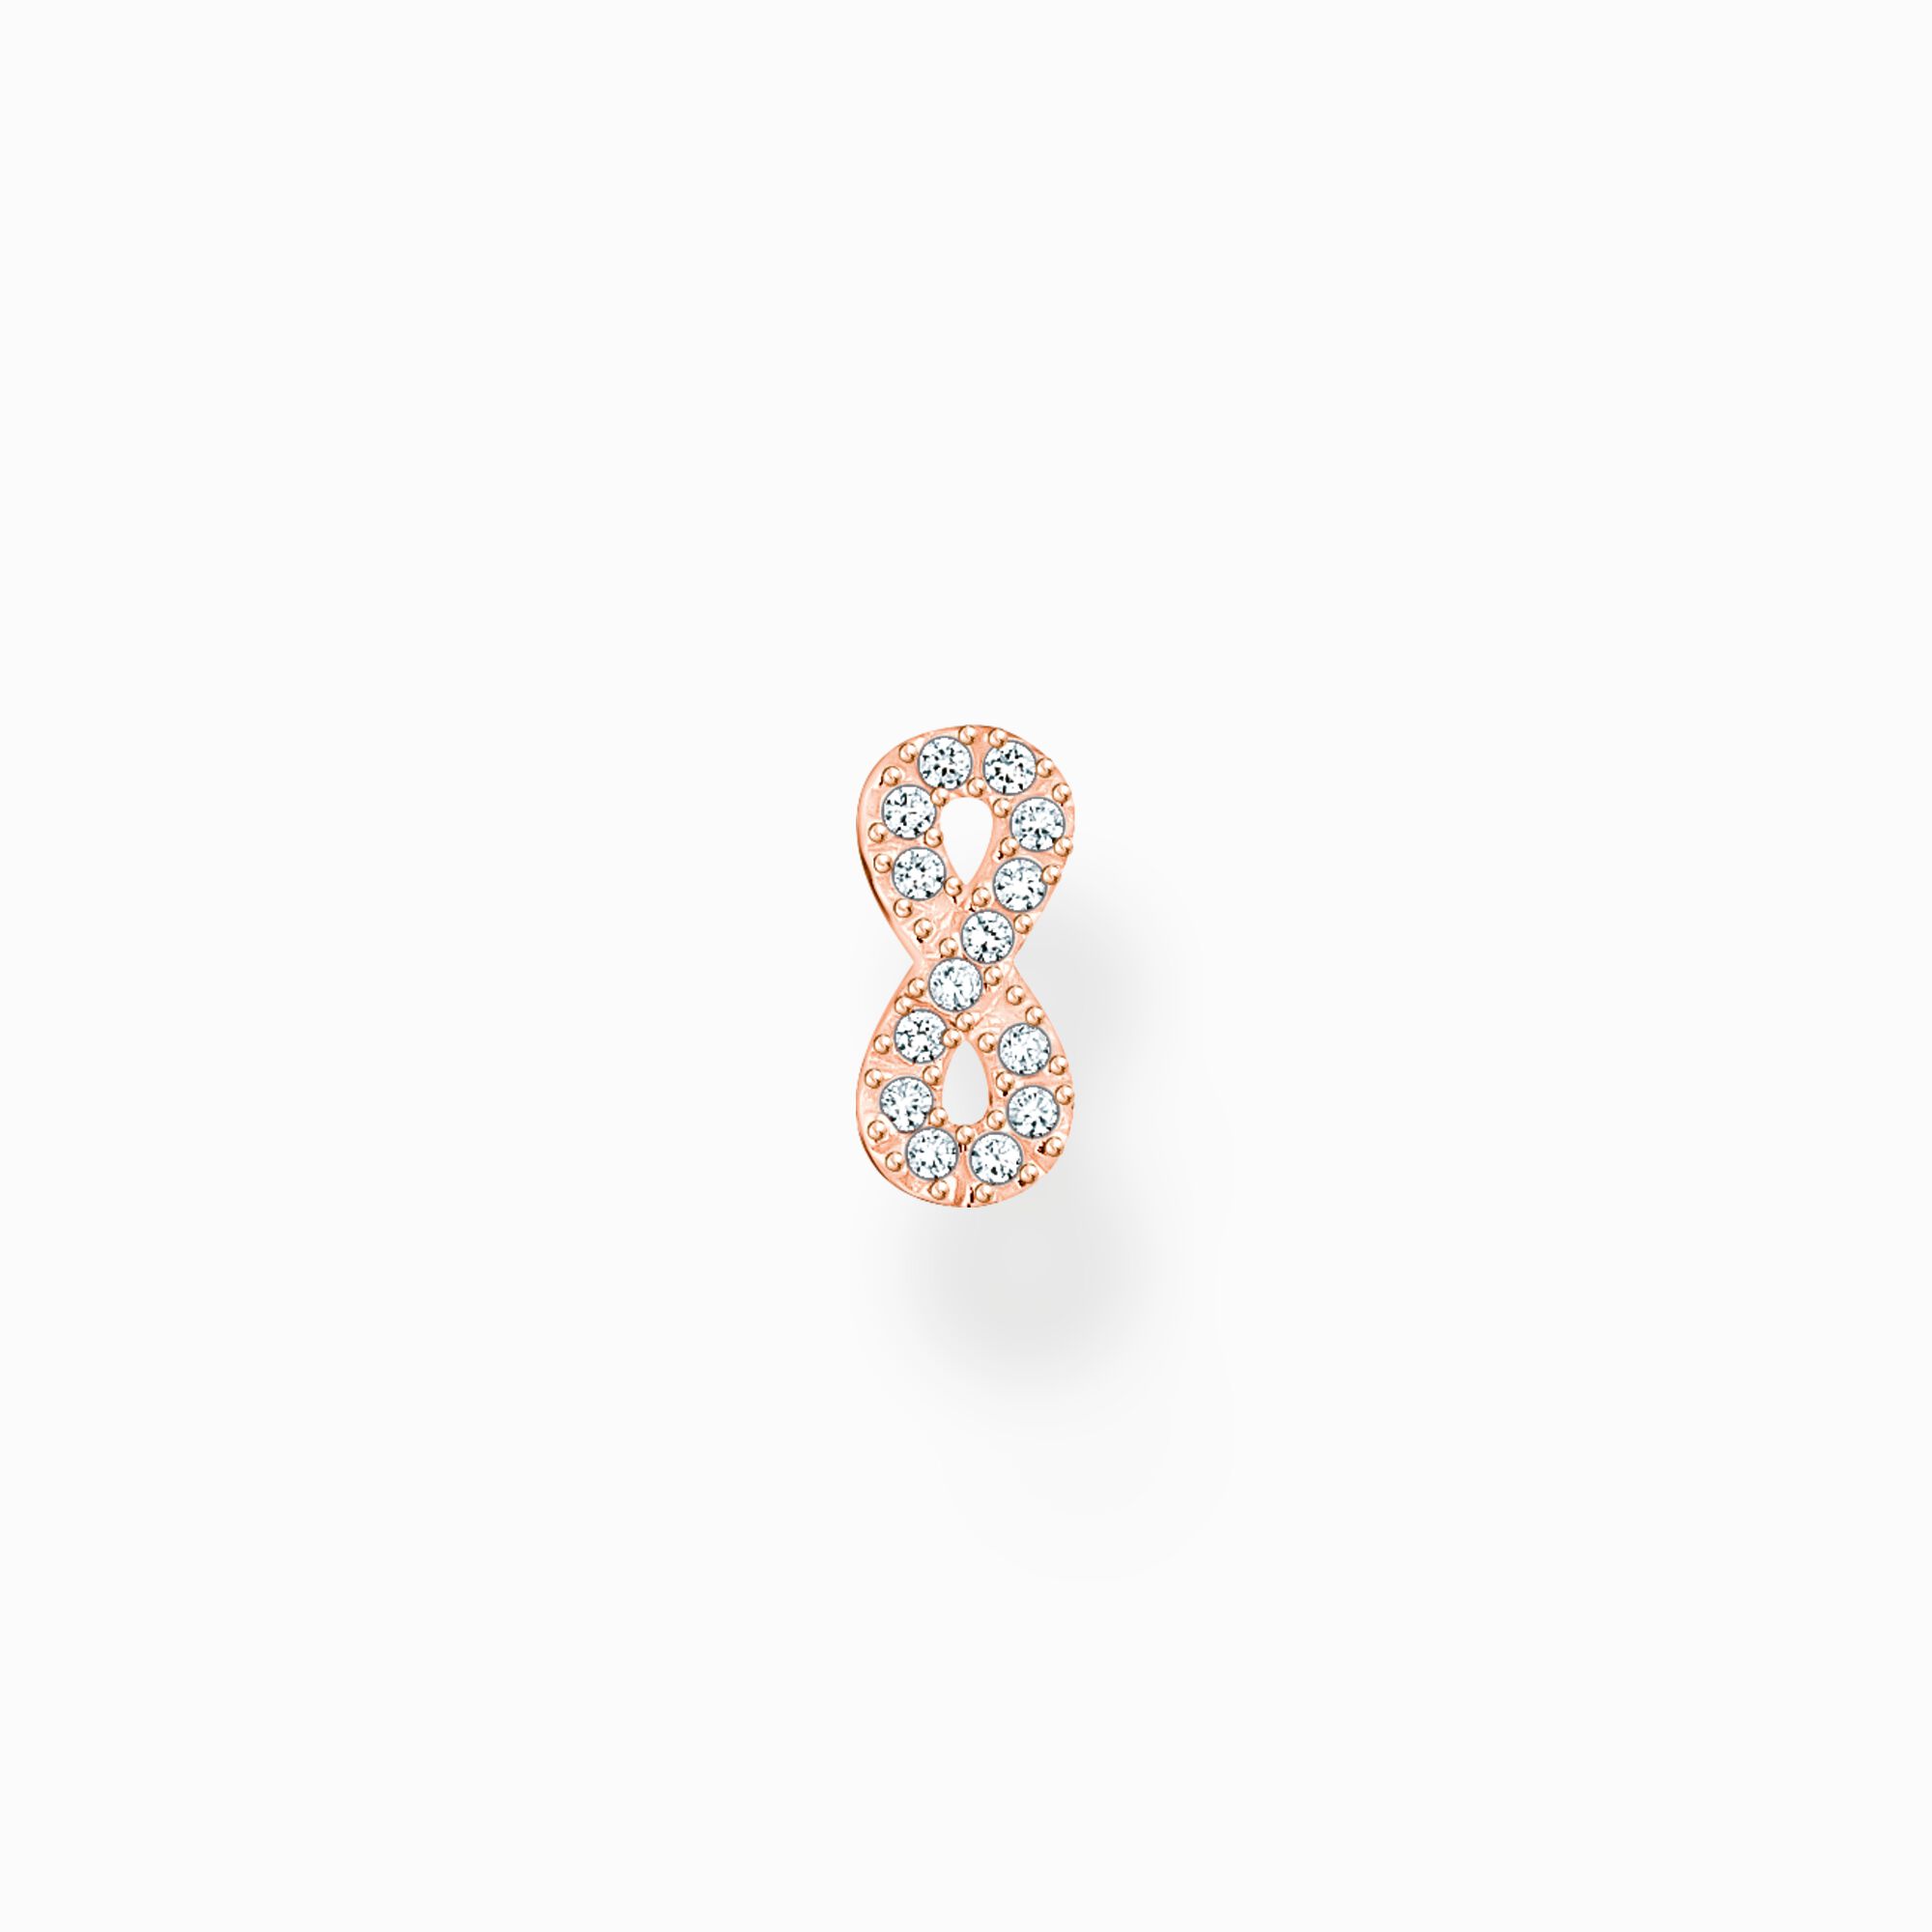 Single ear stud infinity with white stones rose gold plated from the Charming Collection collection in the THOMAS SABO online store